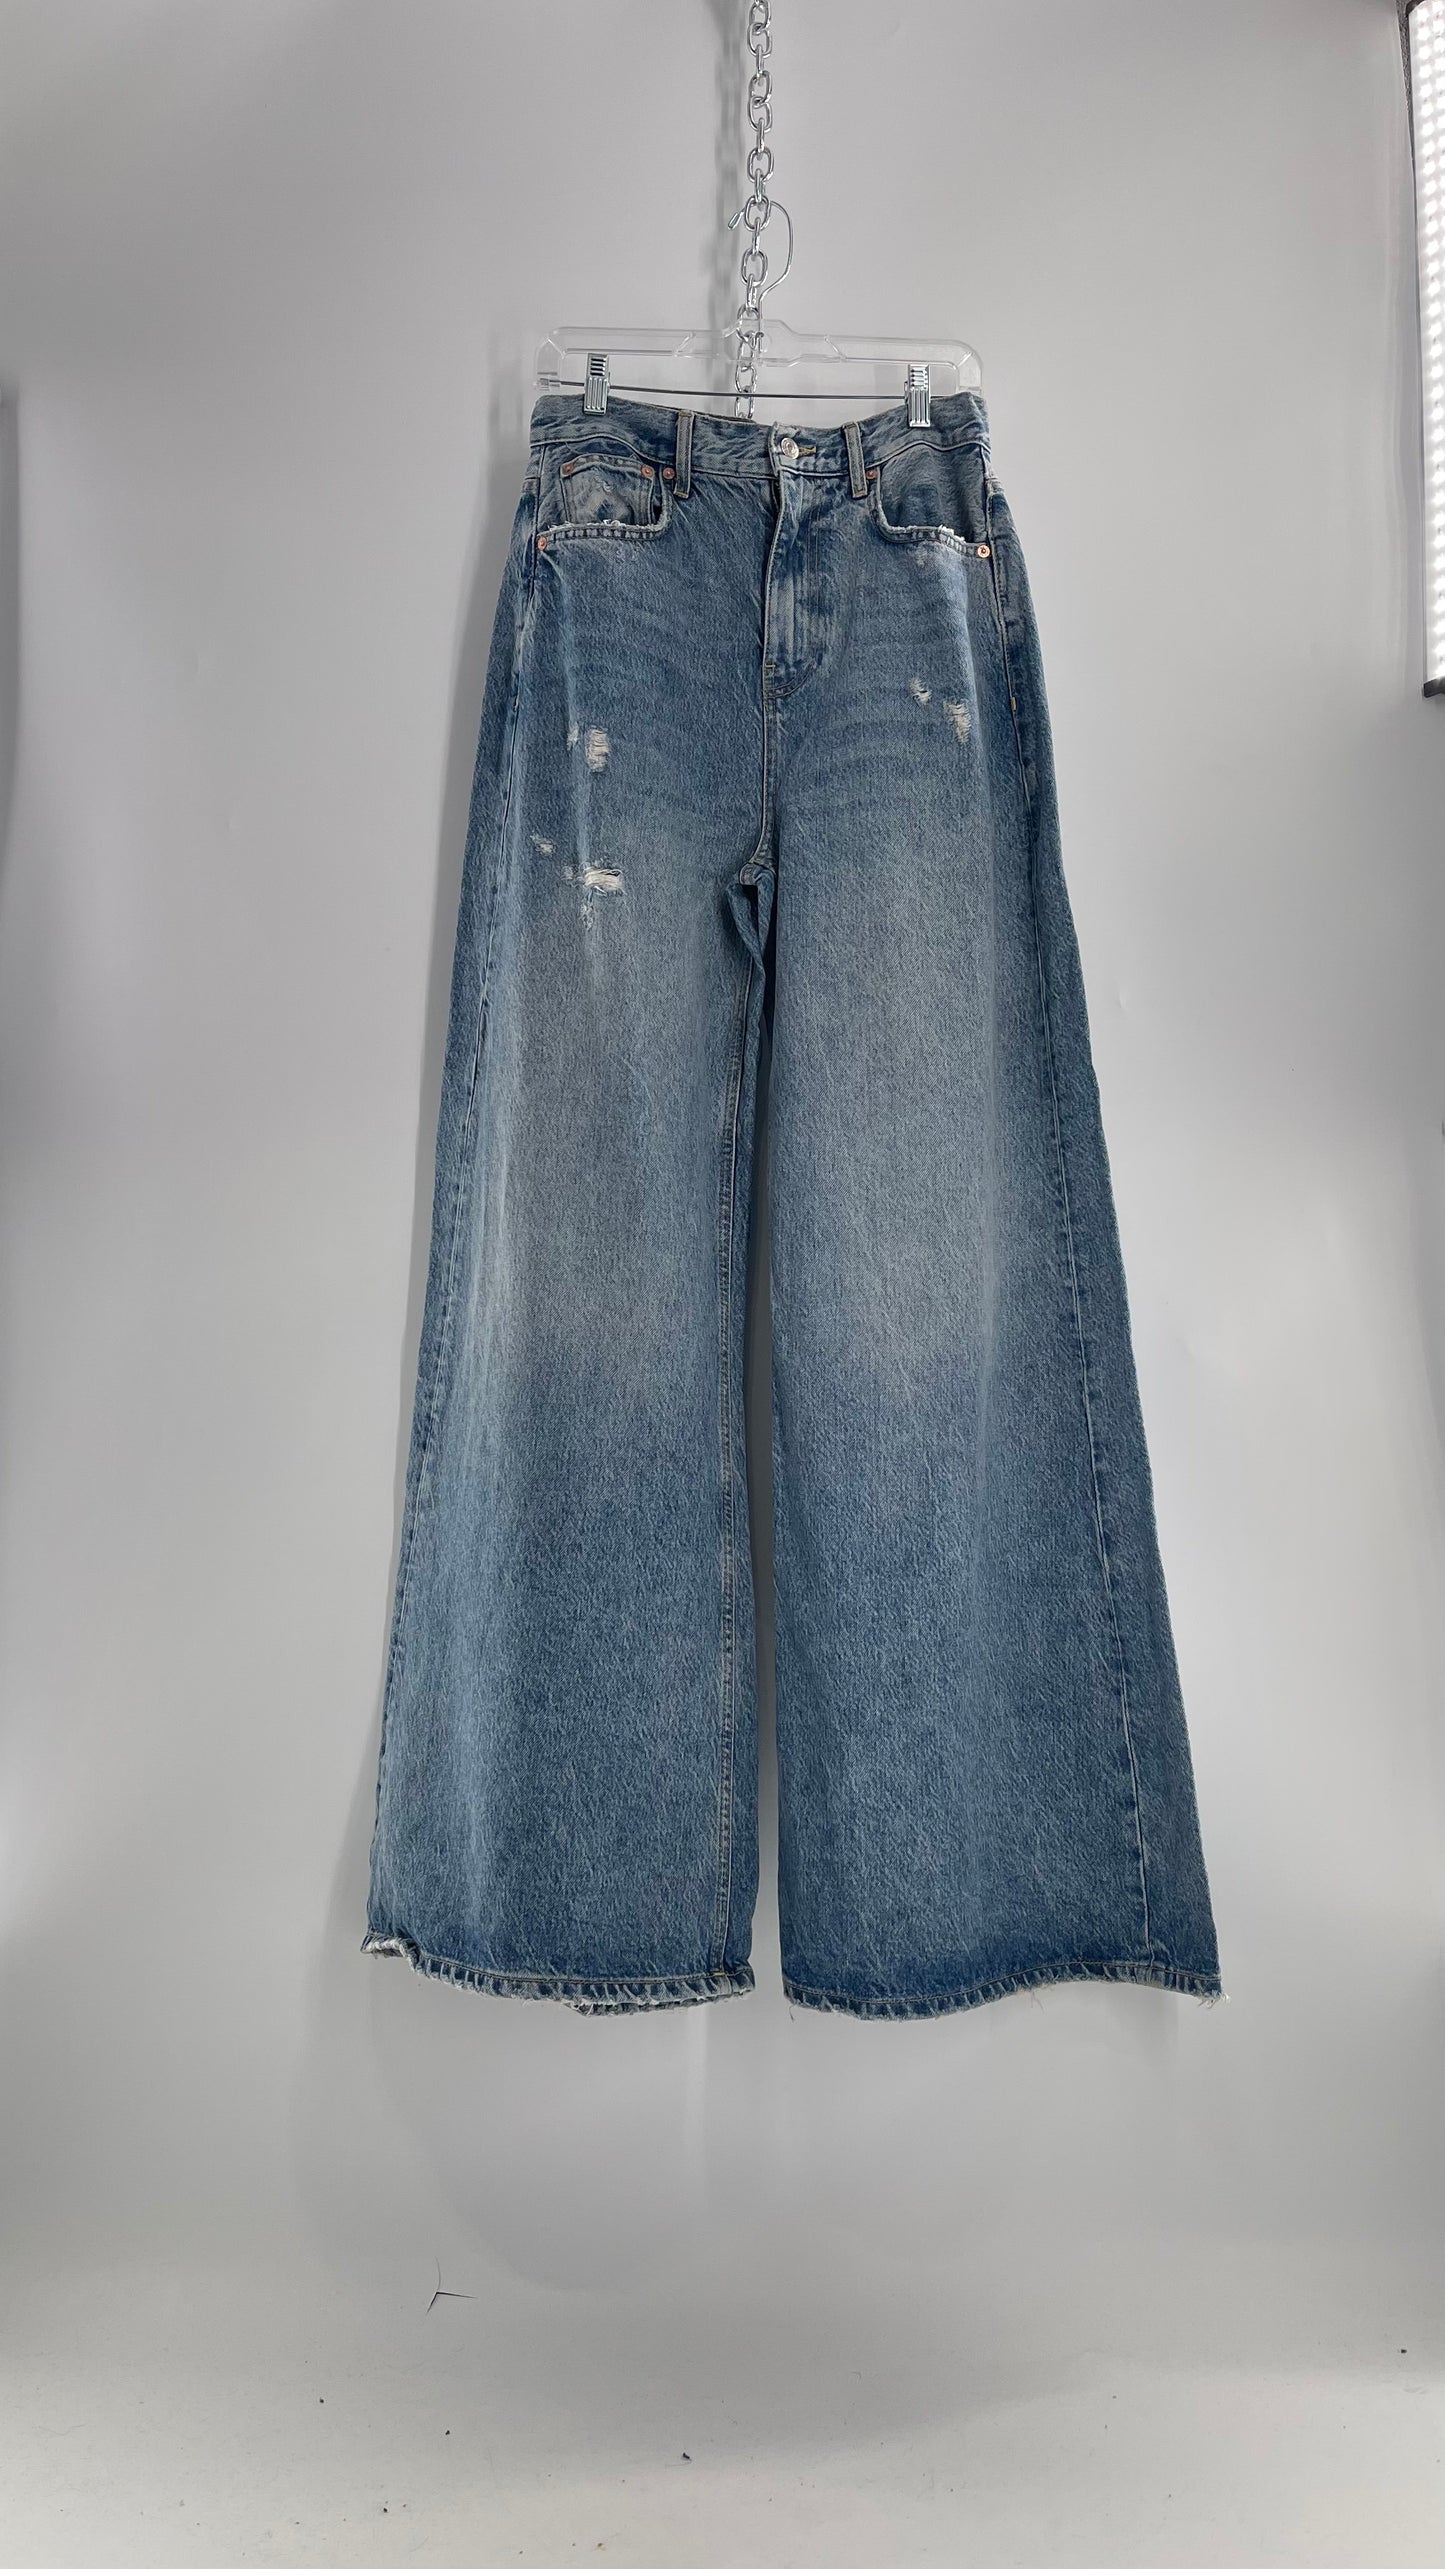 Free People Medium Wash Wide Leg Jeans with Some Distressing and Tags Attached (29)